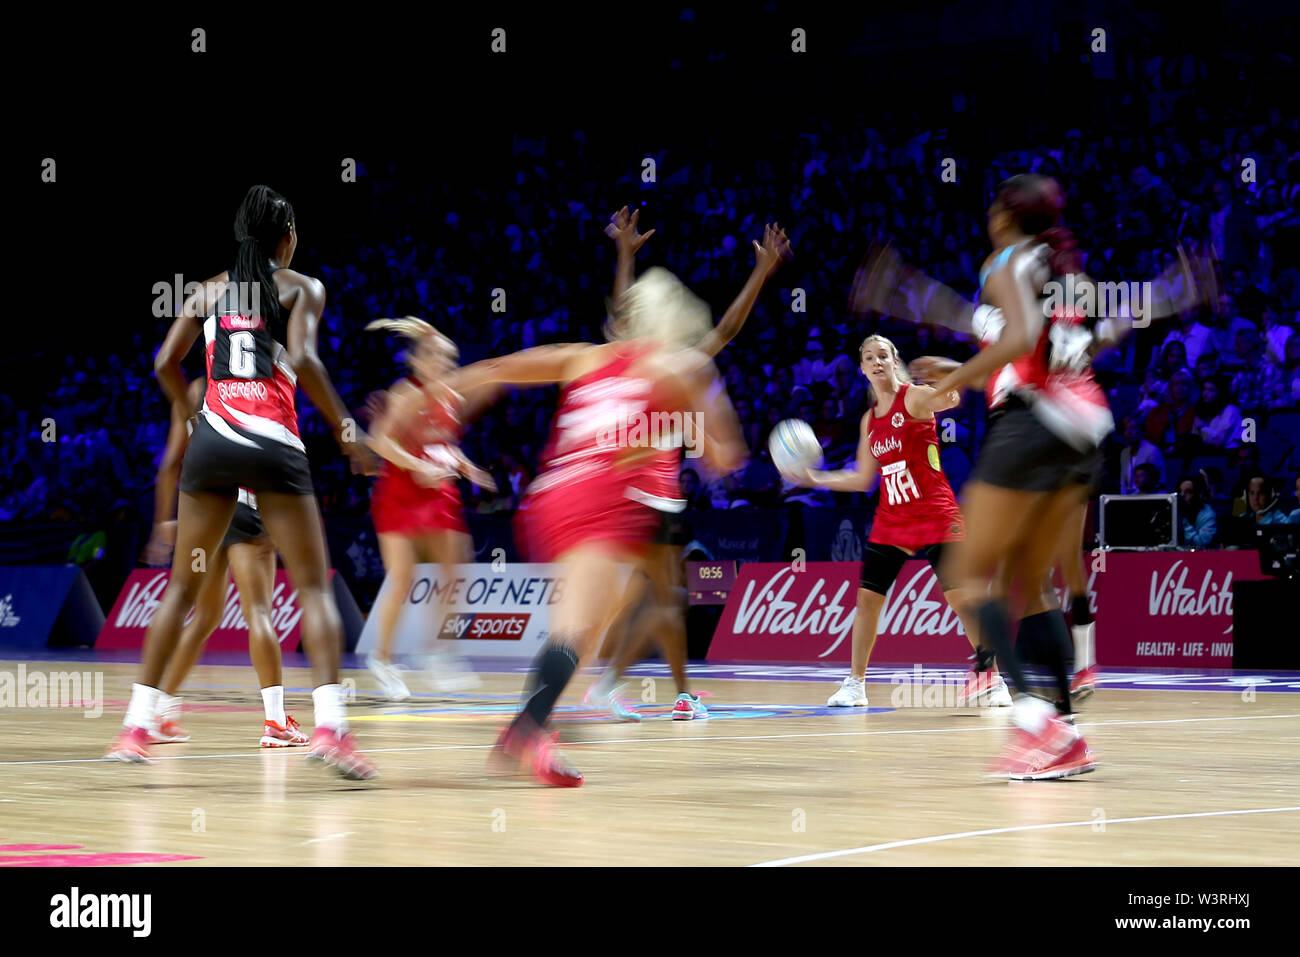 A general view of match action between England and Trinidad and Tobago during the Netball World Cup match at the M&S Bank Arena, Liverpool. Stock Photo